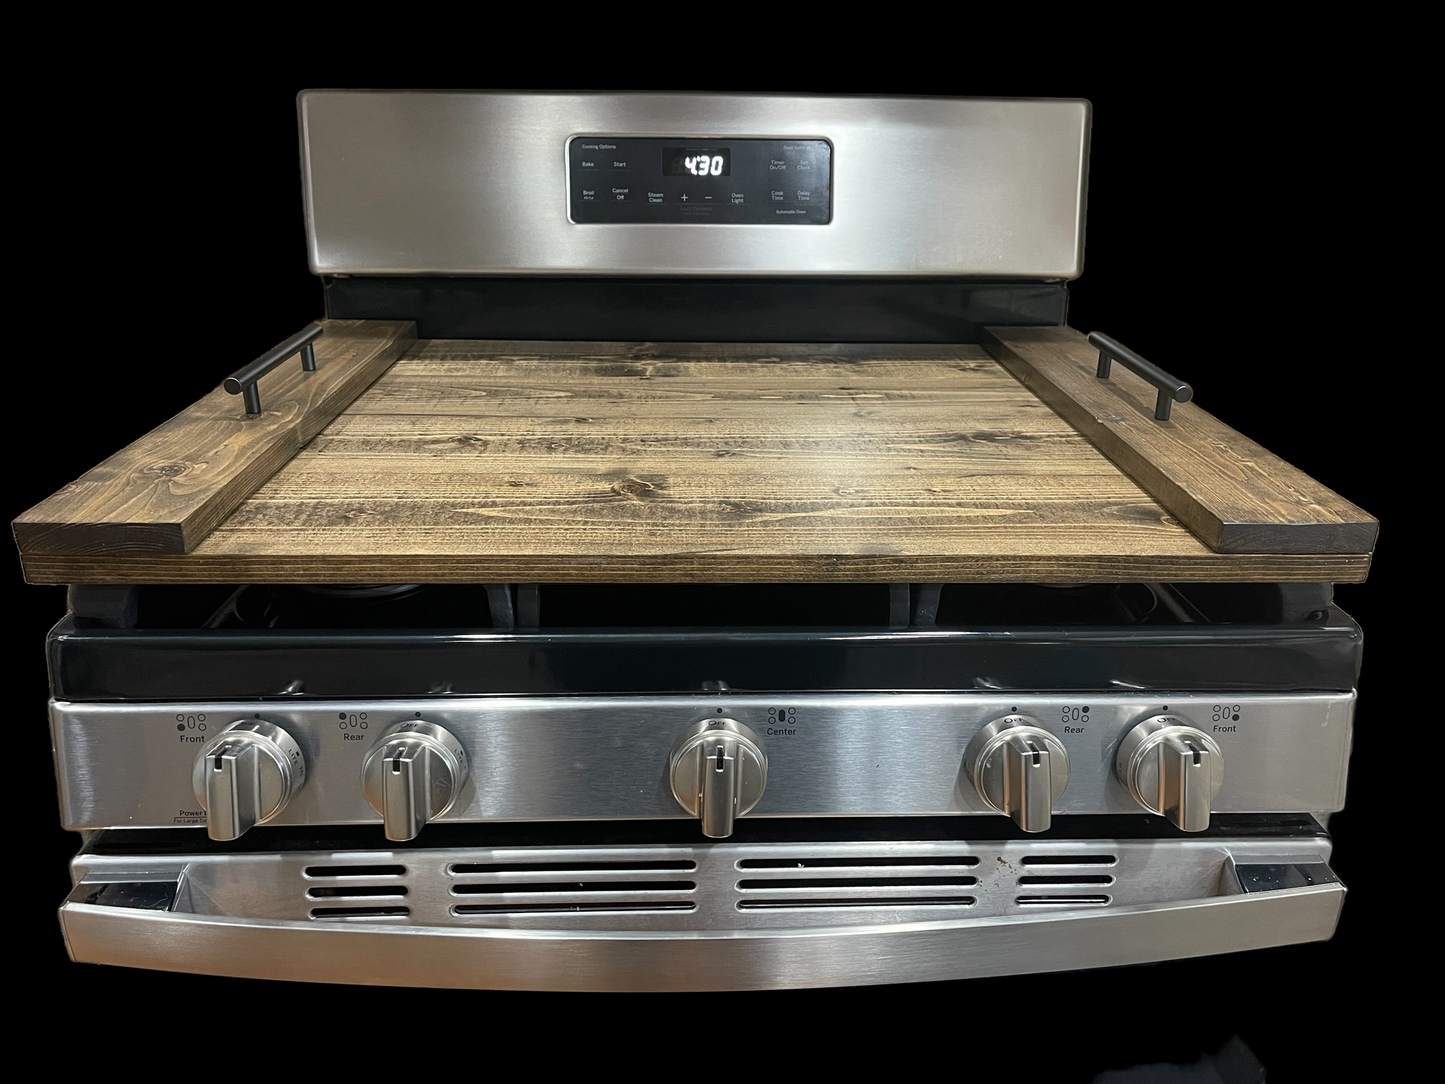 Handmade Industrial Farmhouse Stove Top Cover Noodle Board / Serving Tray Dark Walnut with Black Handles